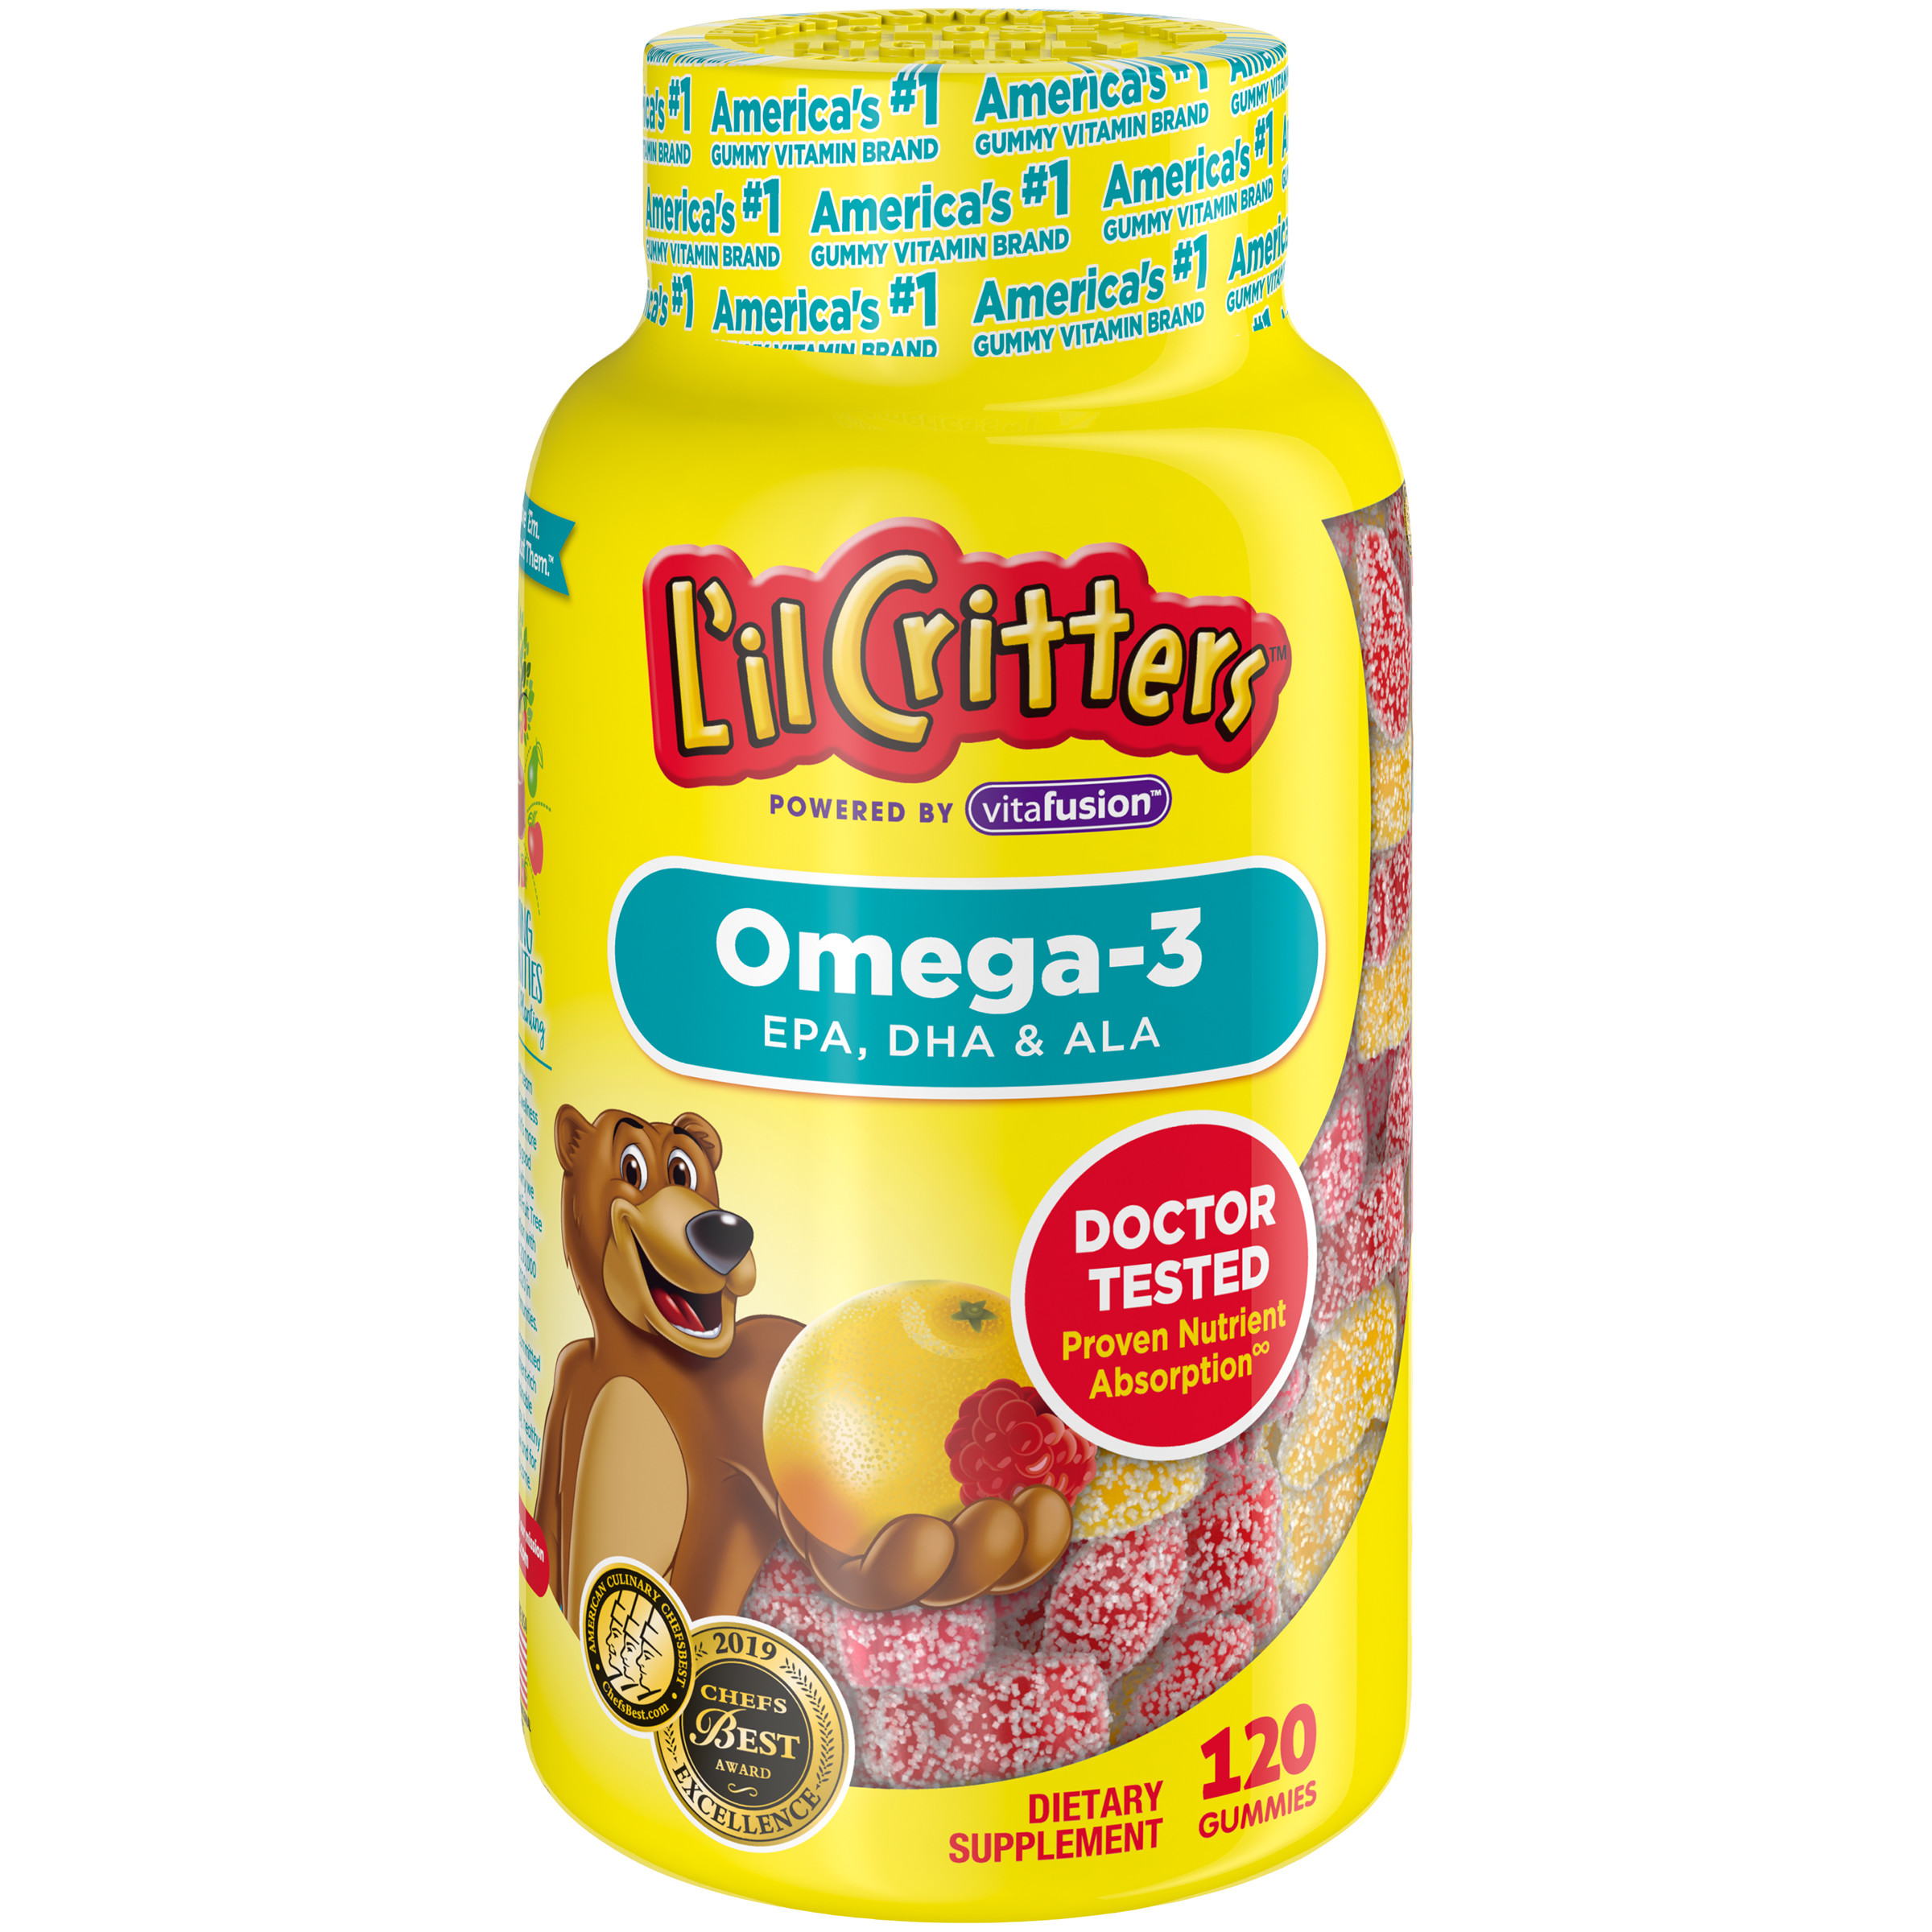 L'il Critters Kids Omega-3 Gummy, 3 Fatty Ccids, DHA, EPA and ALA. 120 ct (60-120 day Supply), Delicious Citrus Flavors - image 1 of 9